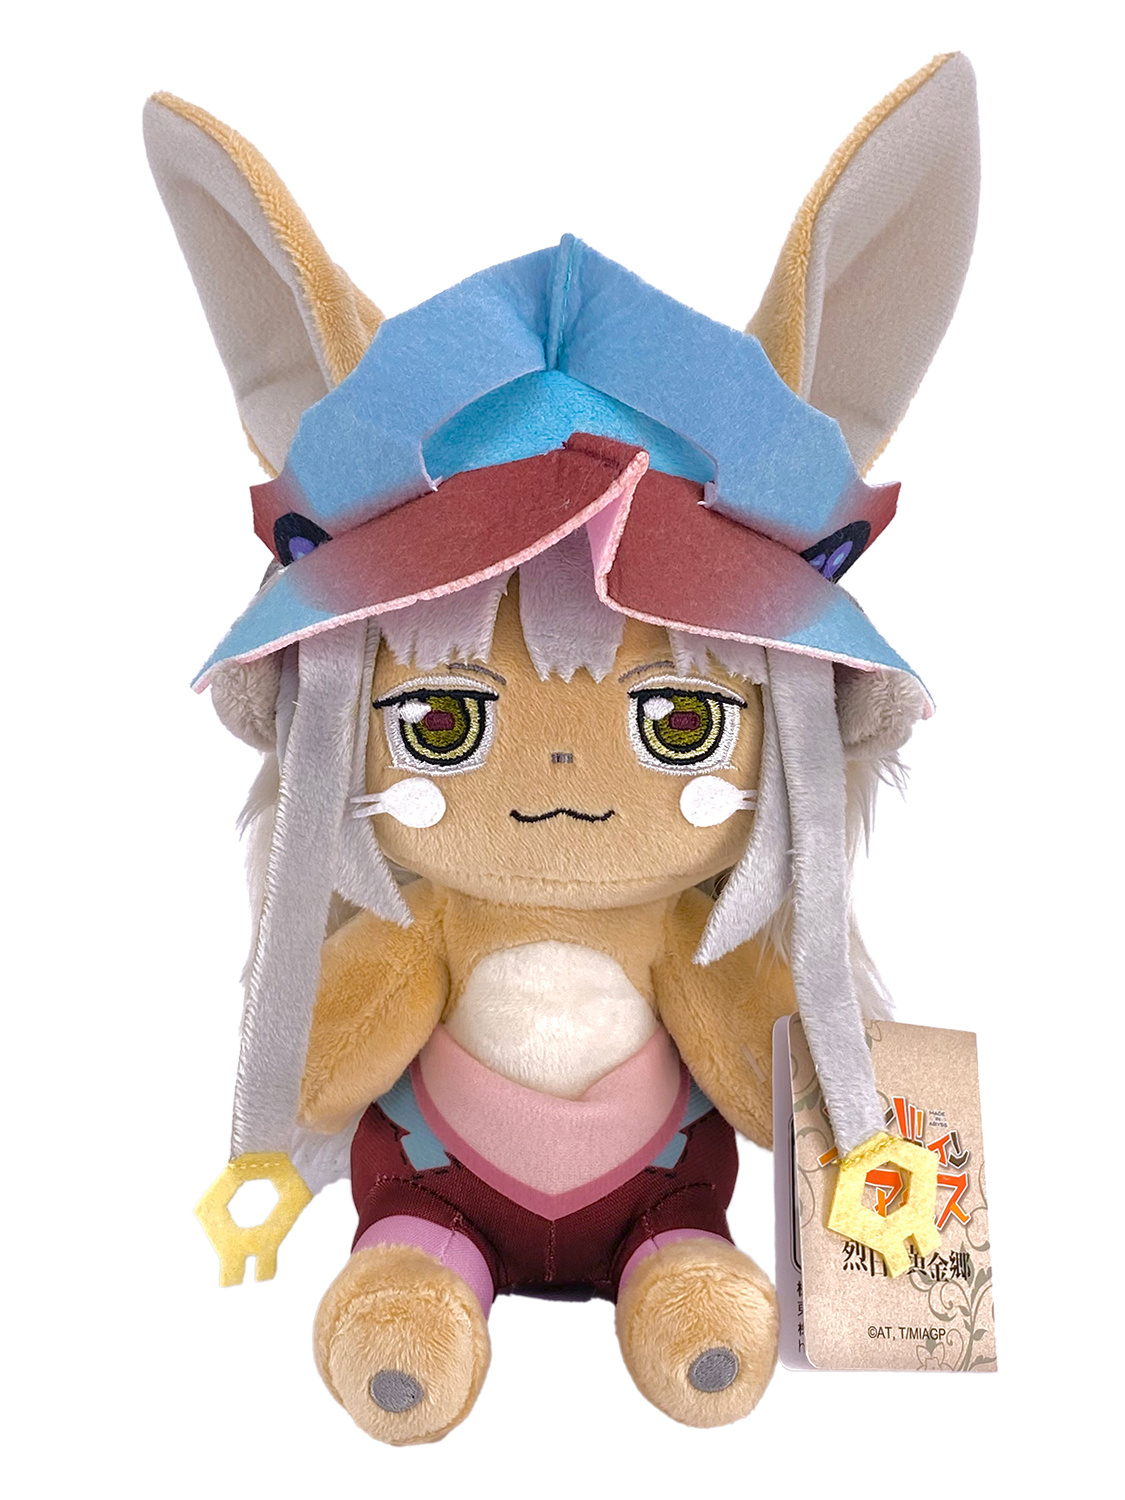 they are going to release Mochikororin plush of Made in Abyss